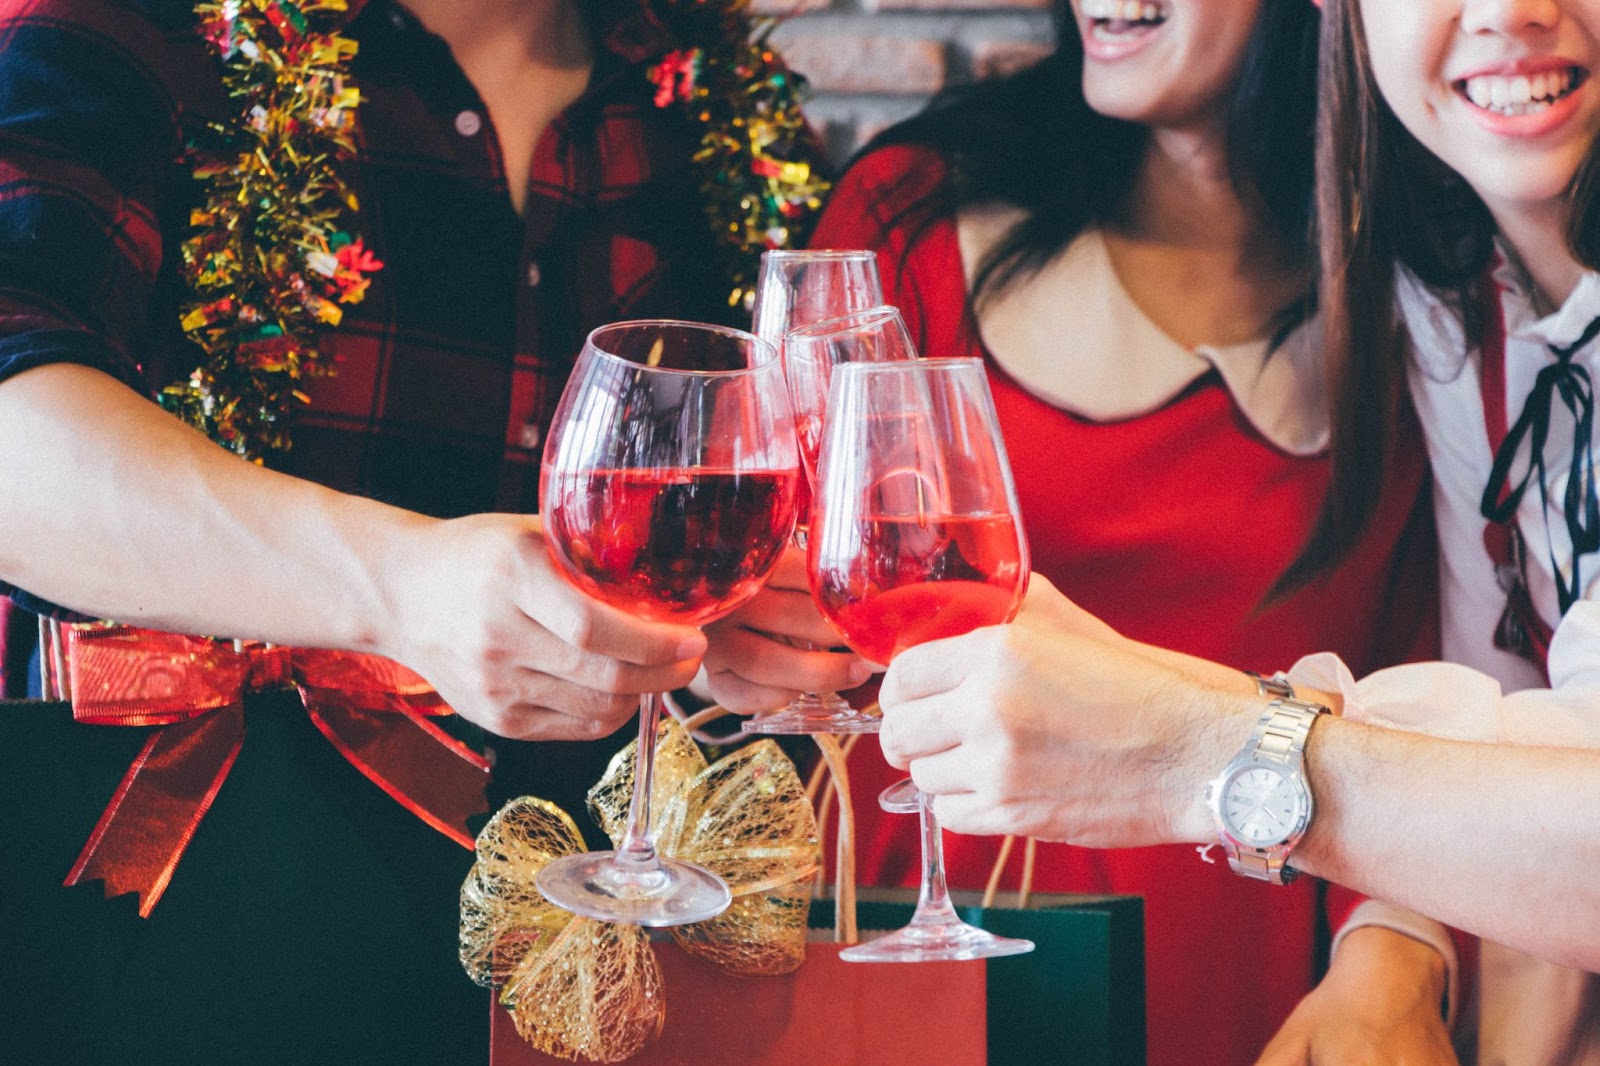 A group of friends share a bottle of wine after exchanging Christmas gifts